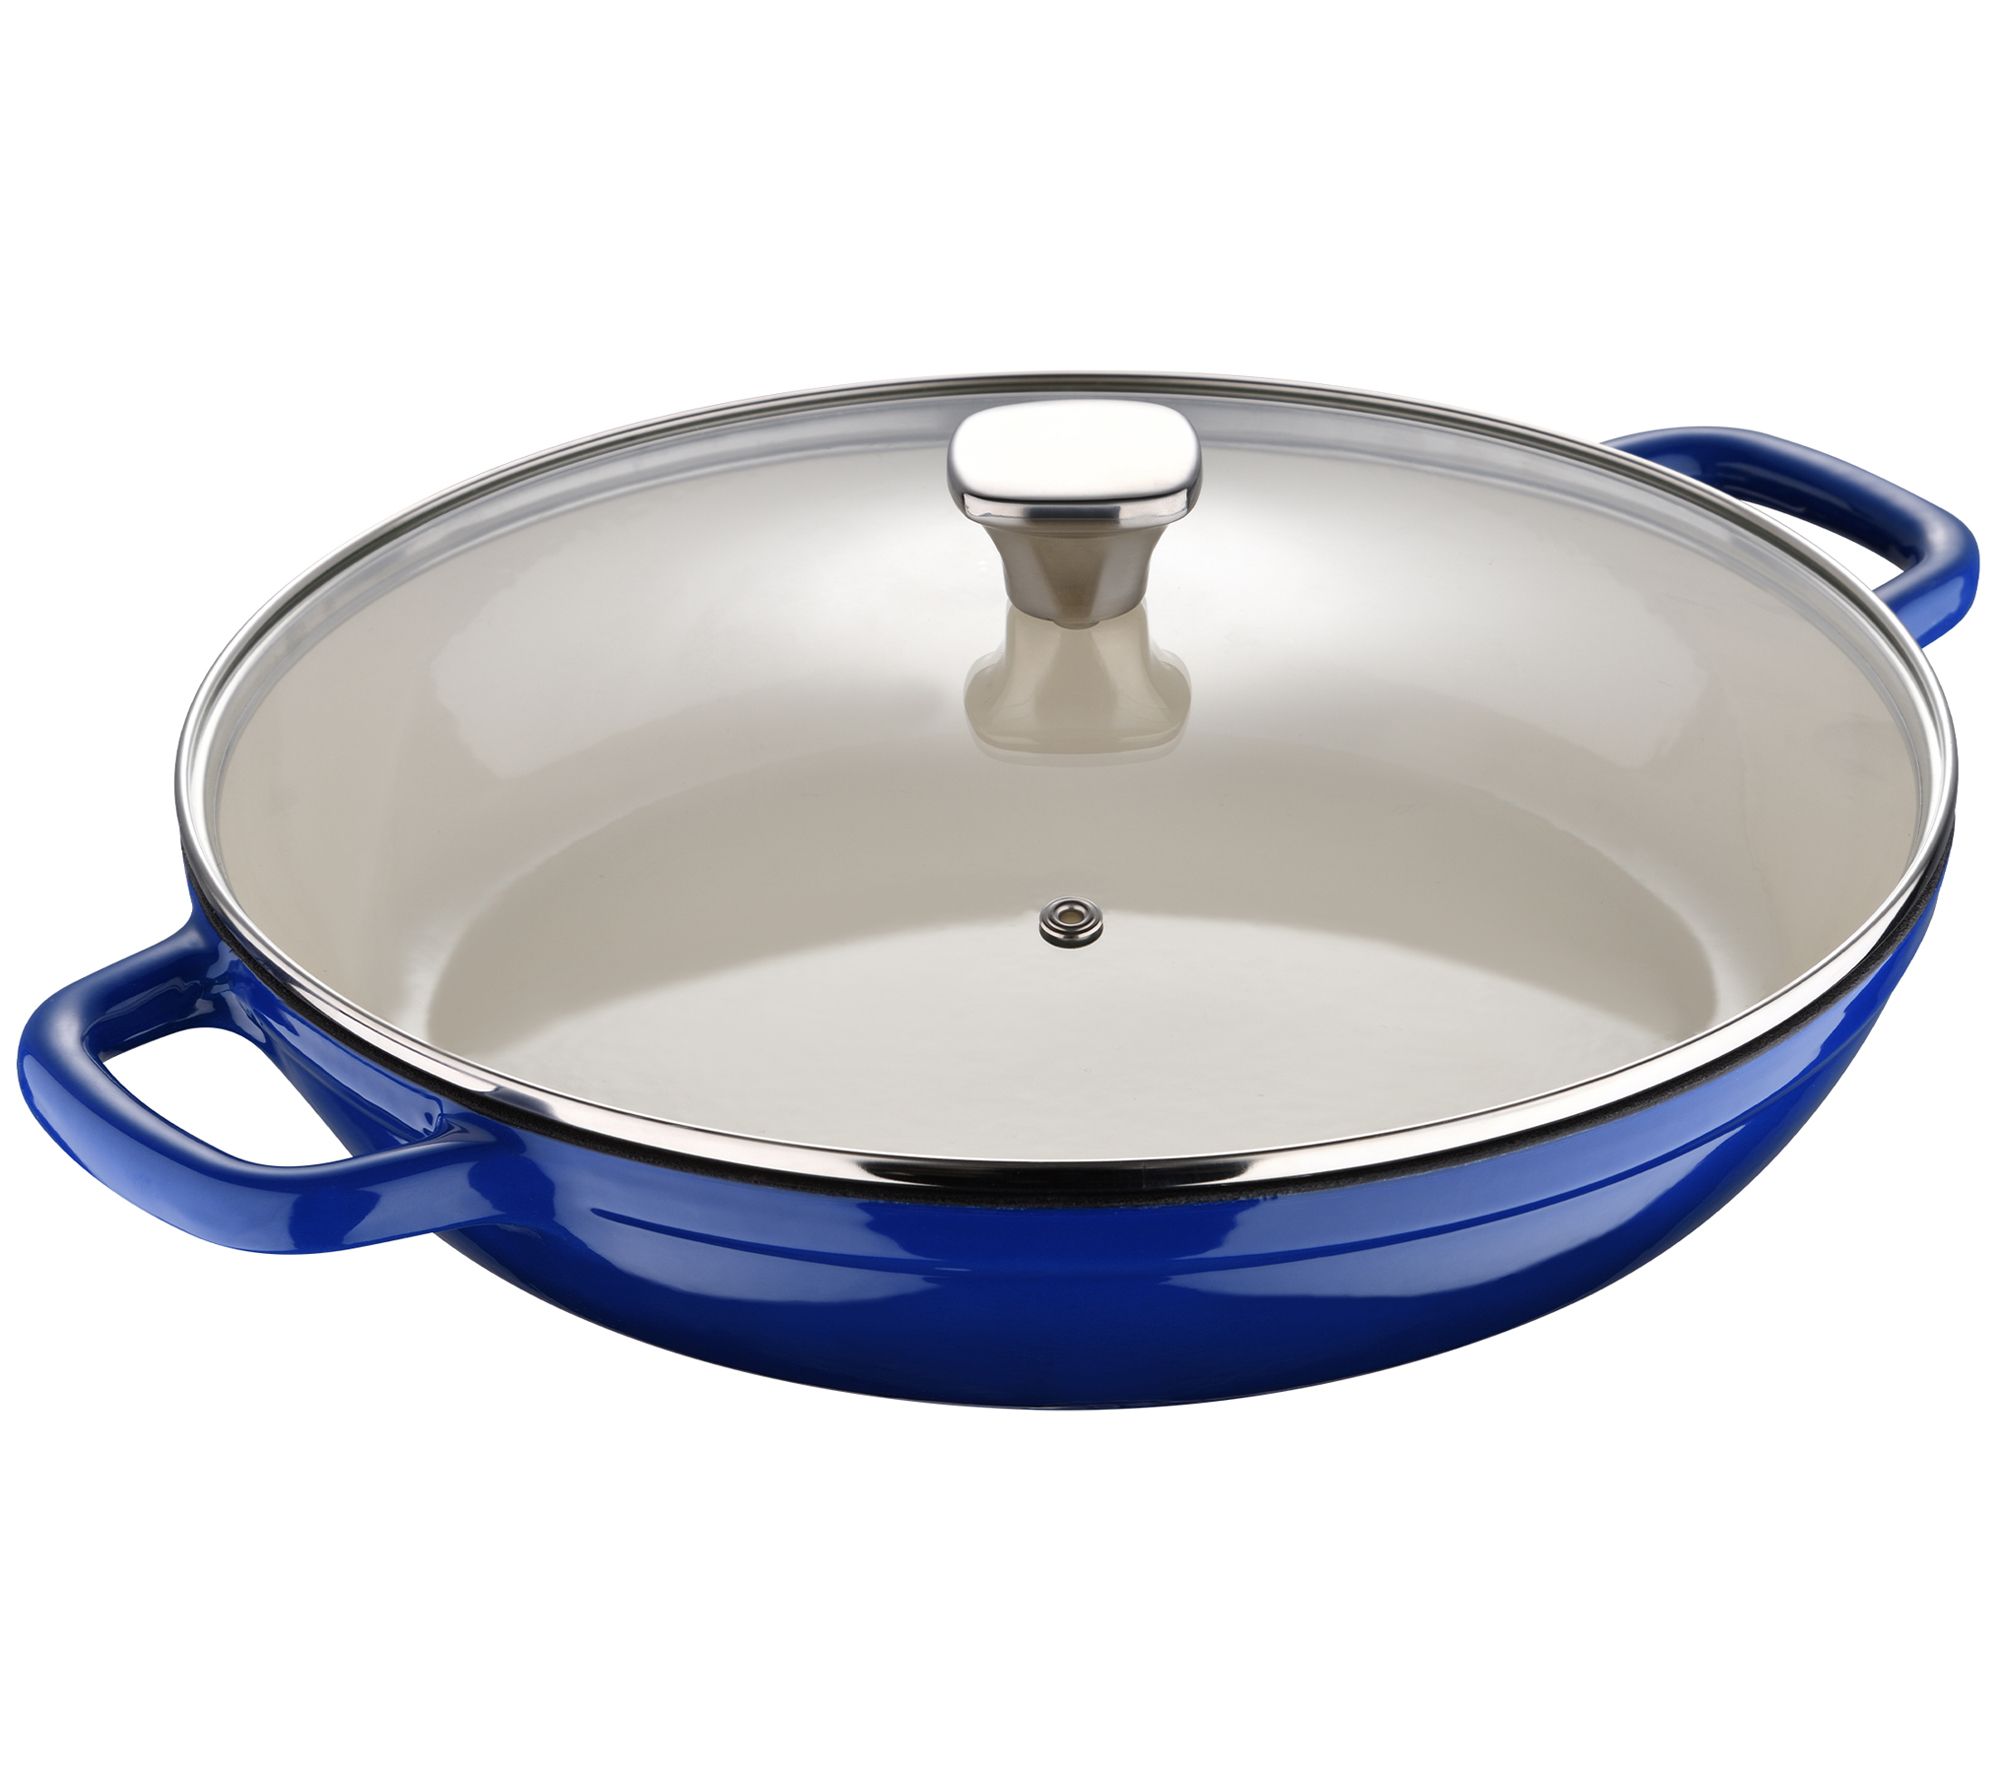 Le Creuset Cast Iron 7.5-qt Classic Chef's Oven with Glass Lid on QVC 